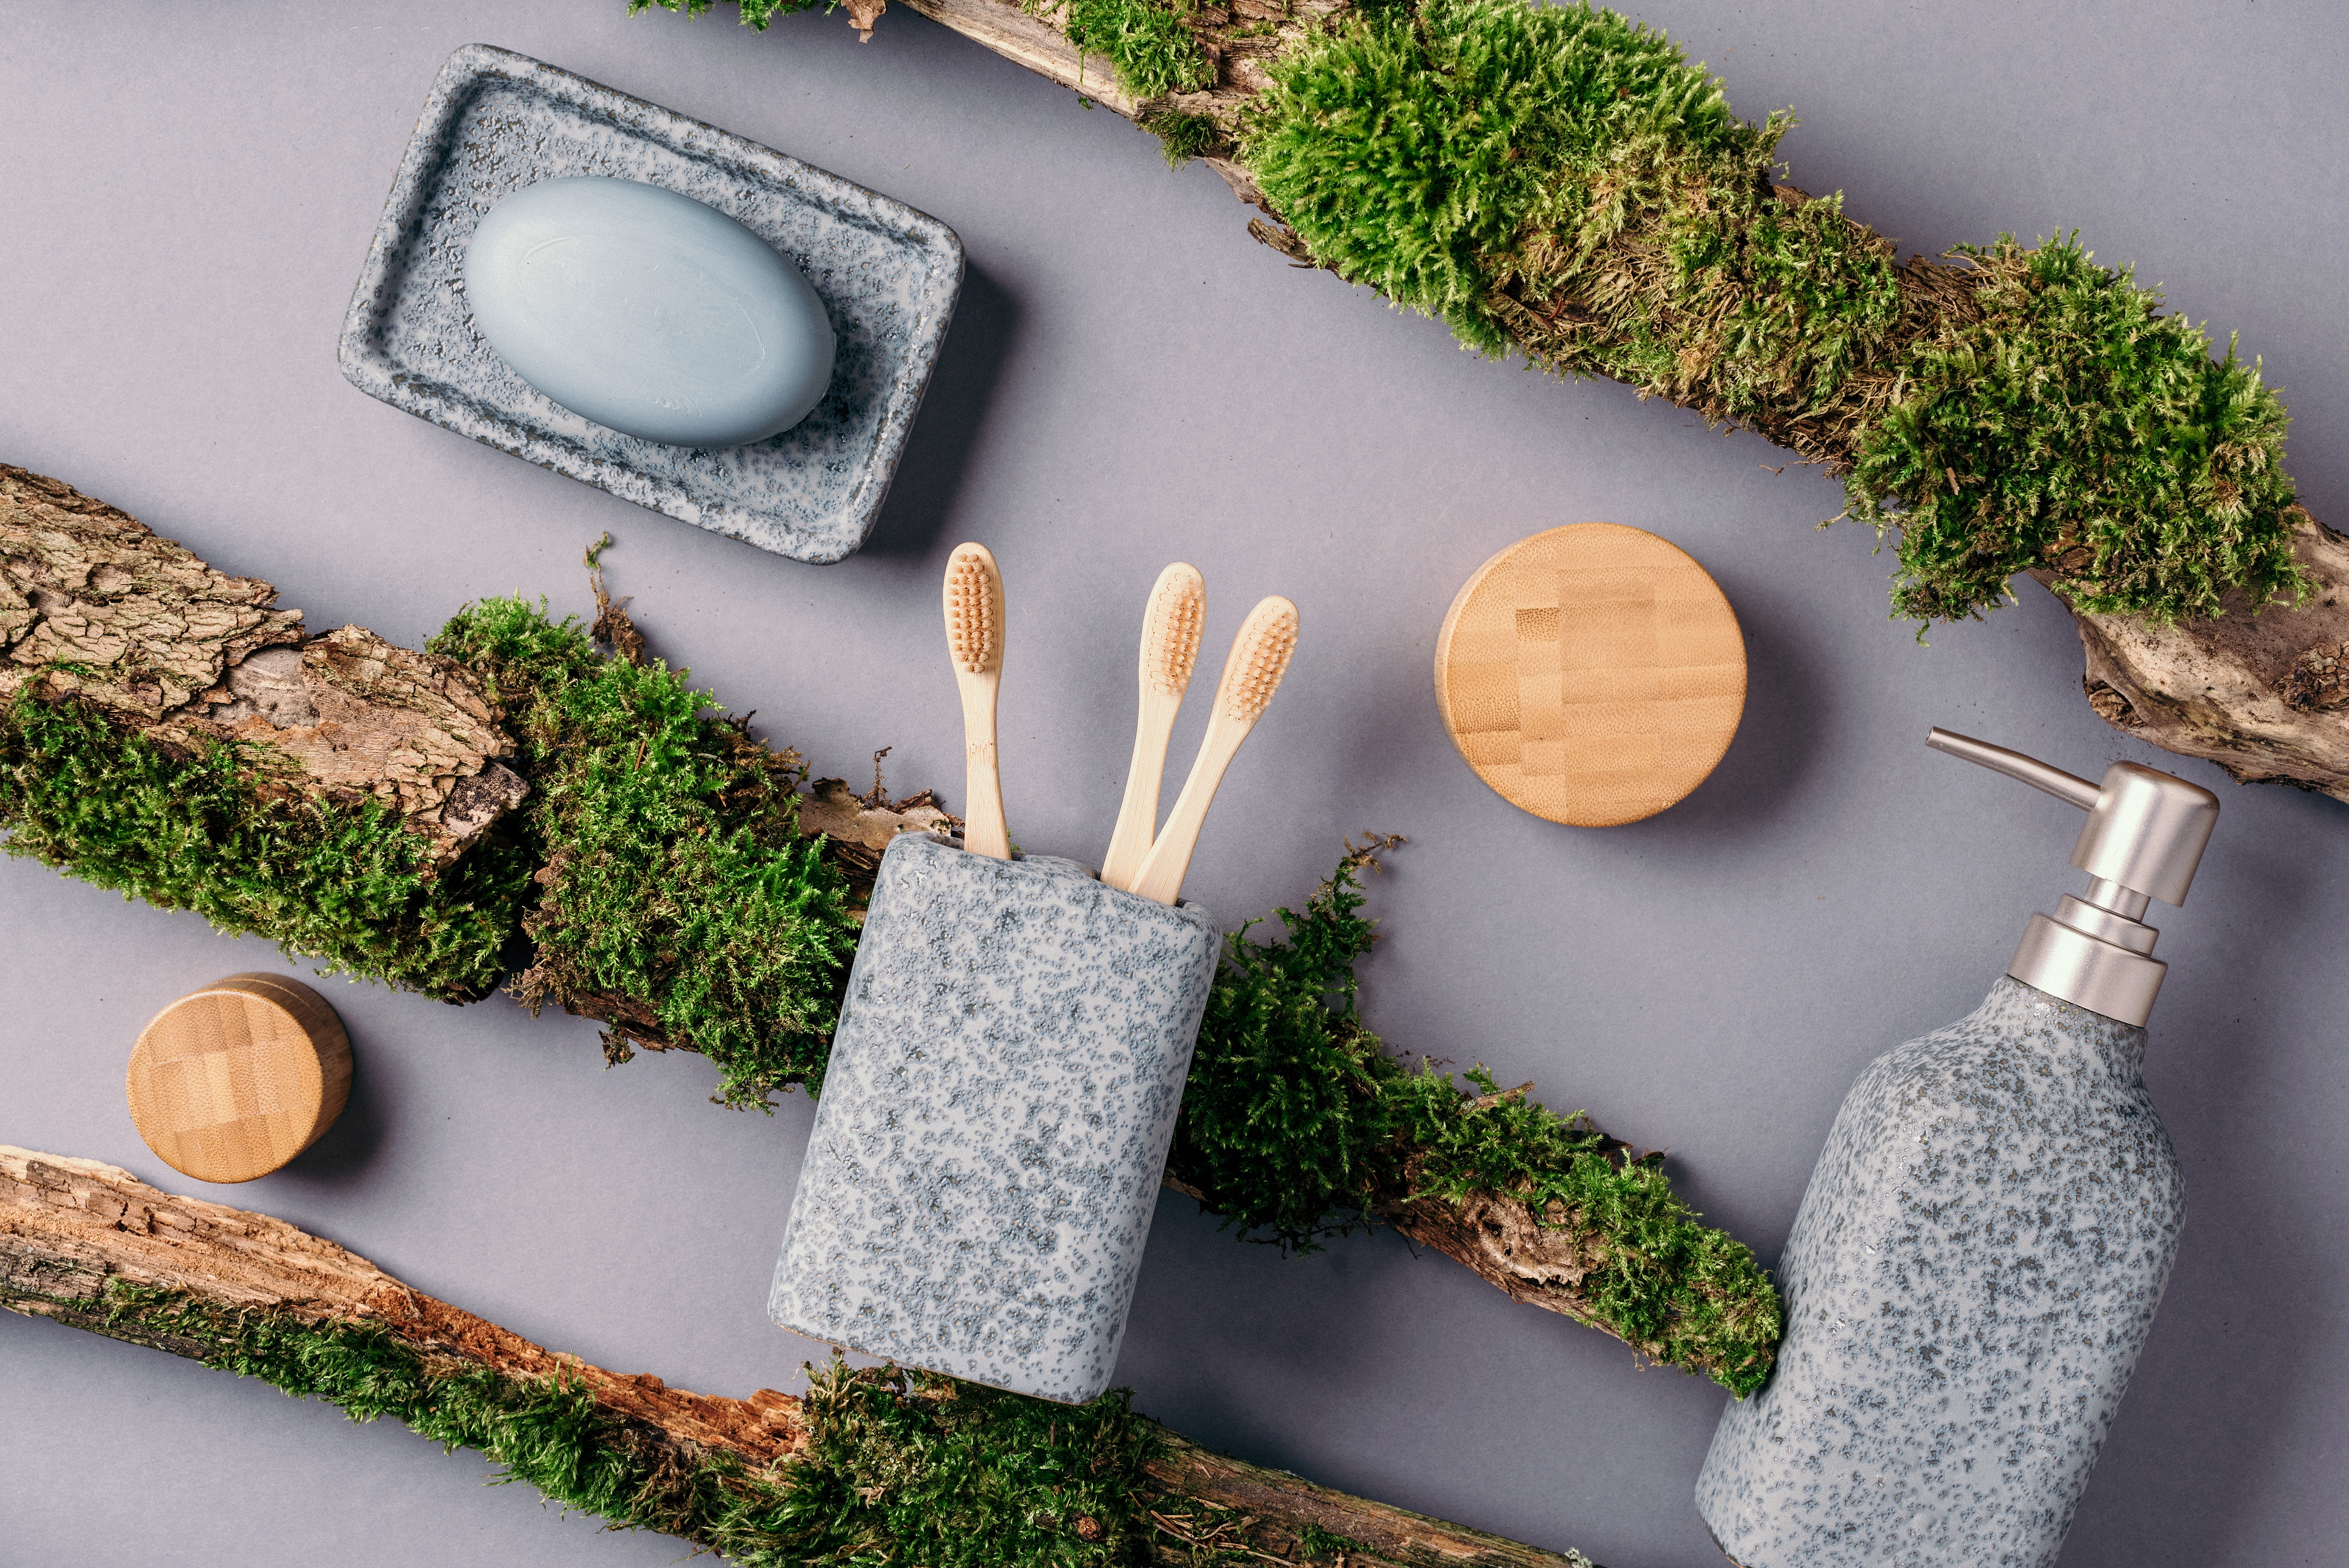 Zero waste, plastic free, sustainable concept. Bamboo bath accessories - soap dish, soap dispenser, tooth brush, organic dry shampoo for personal hygiene on green moss texture. Copy space. Top view (Foto: Getty Images/iStockphoto)